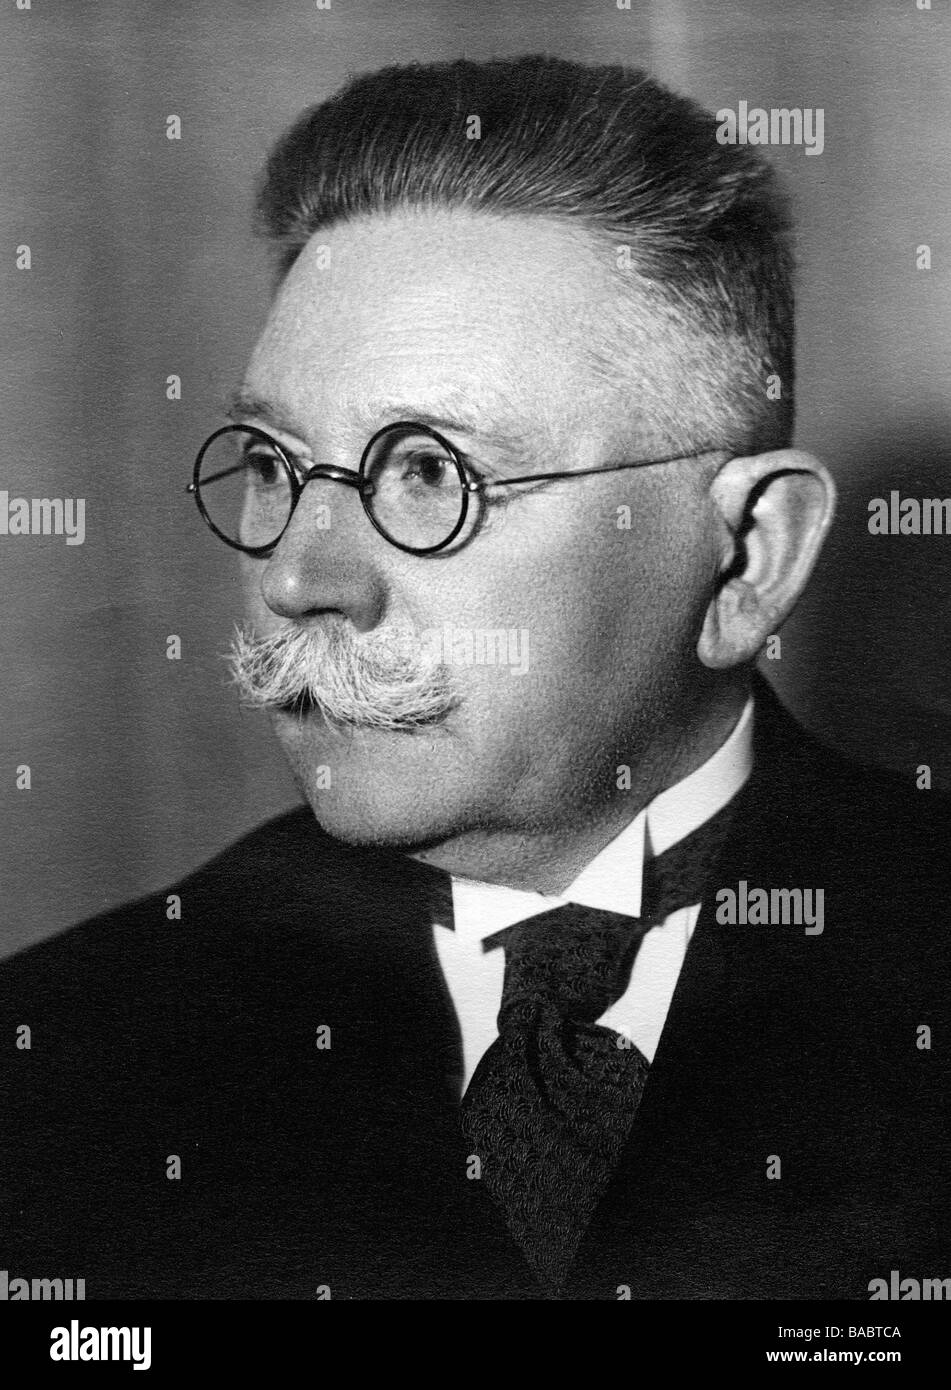 Hugenberg, Alfred, 19.6.1865 - 12.3.1951, German publisher and politician (DNVP), portrait, photography with dedication, 4.10.1933, Stock Photo